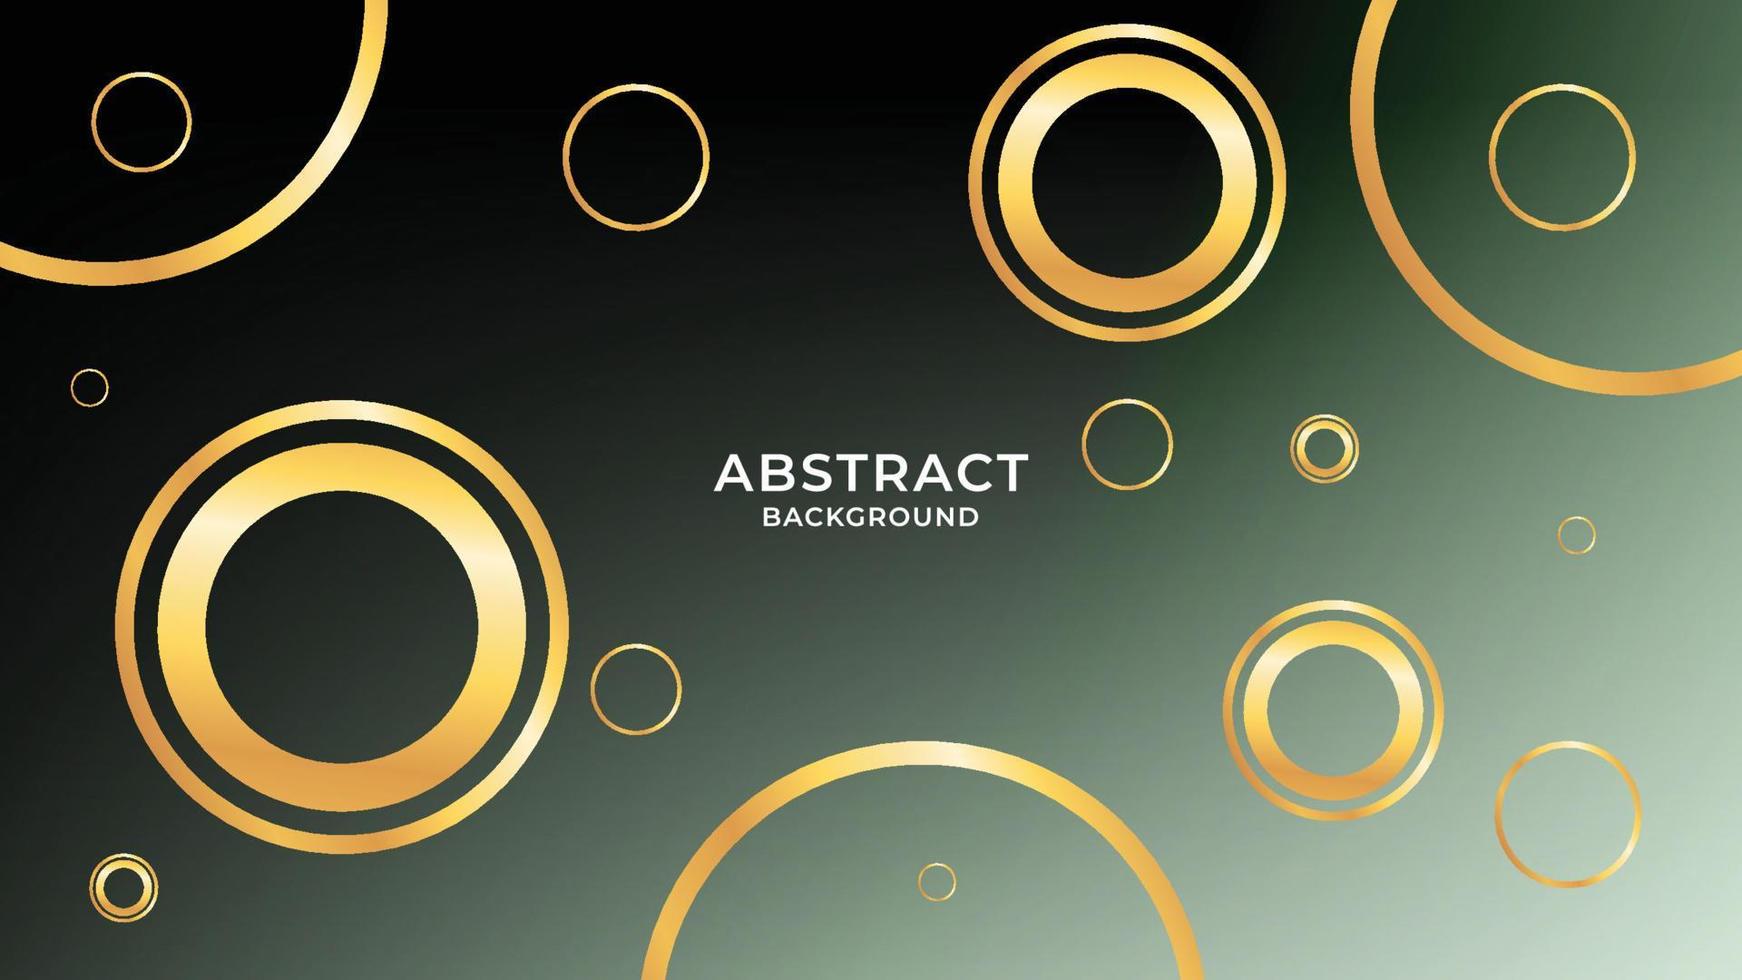 Abstract Background With Golden Circles Design Template vector